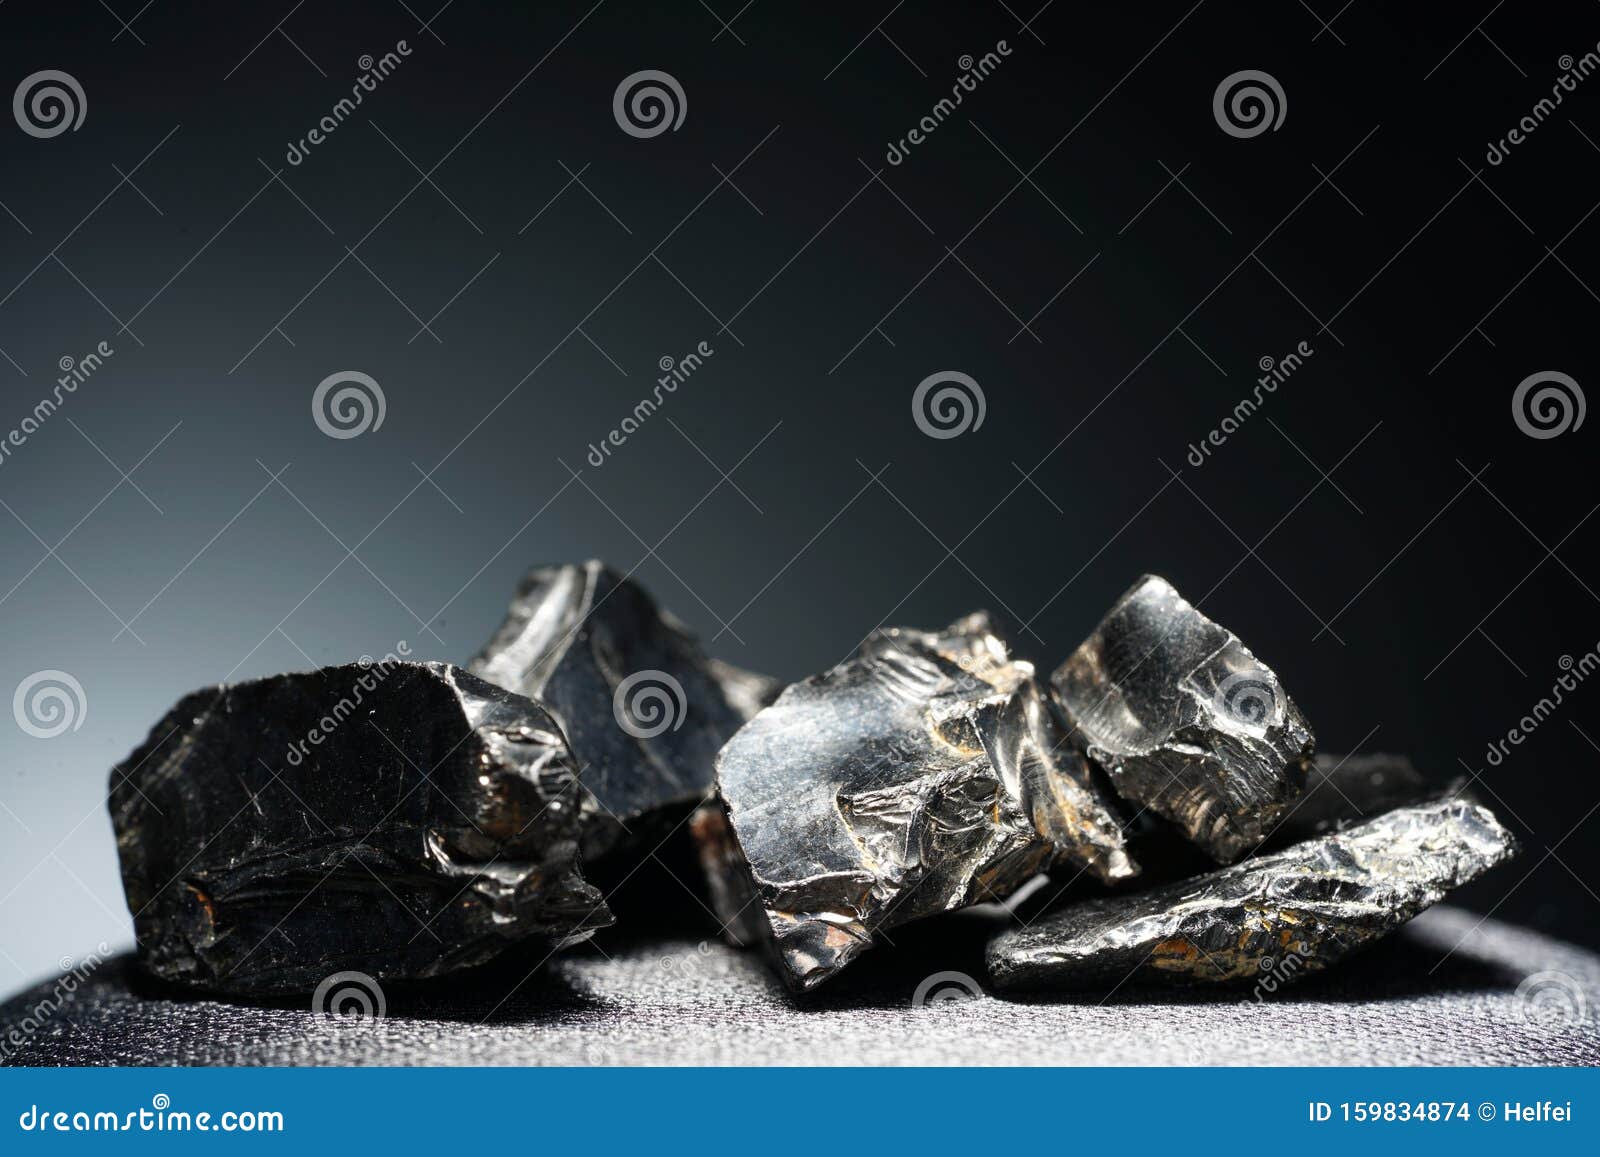 shungit is a black rock that consists mainly of carbon and was photographed in top quality and studio quality.